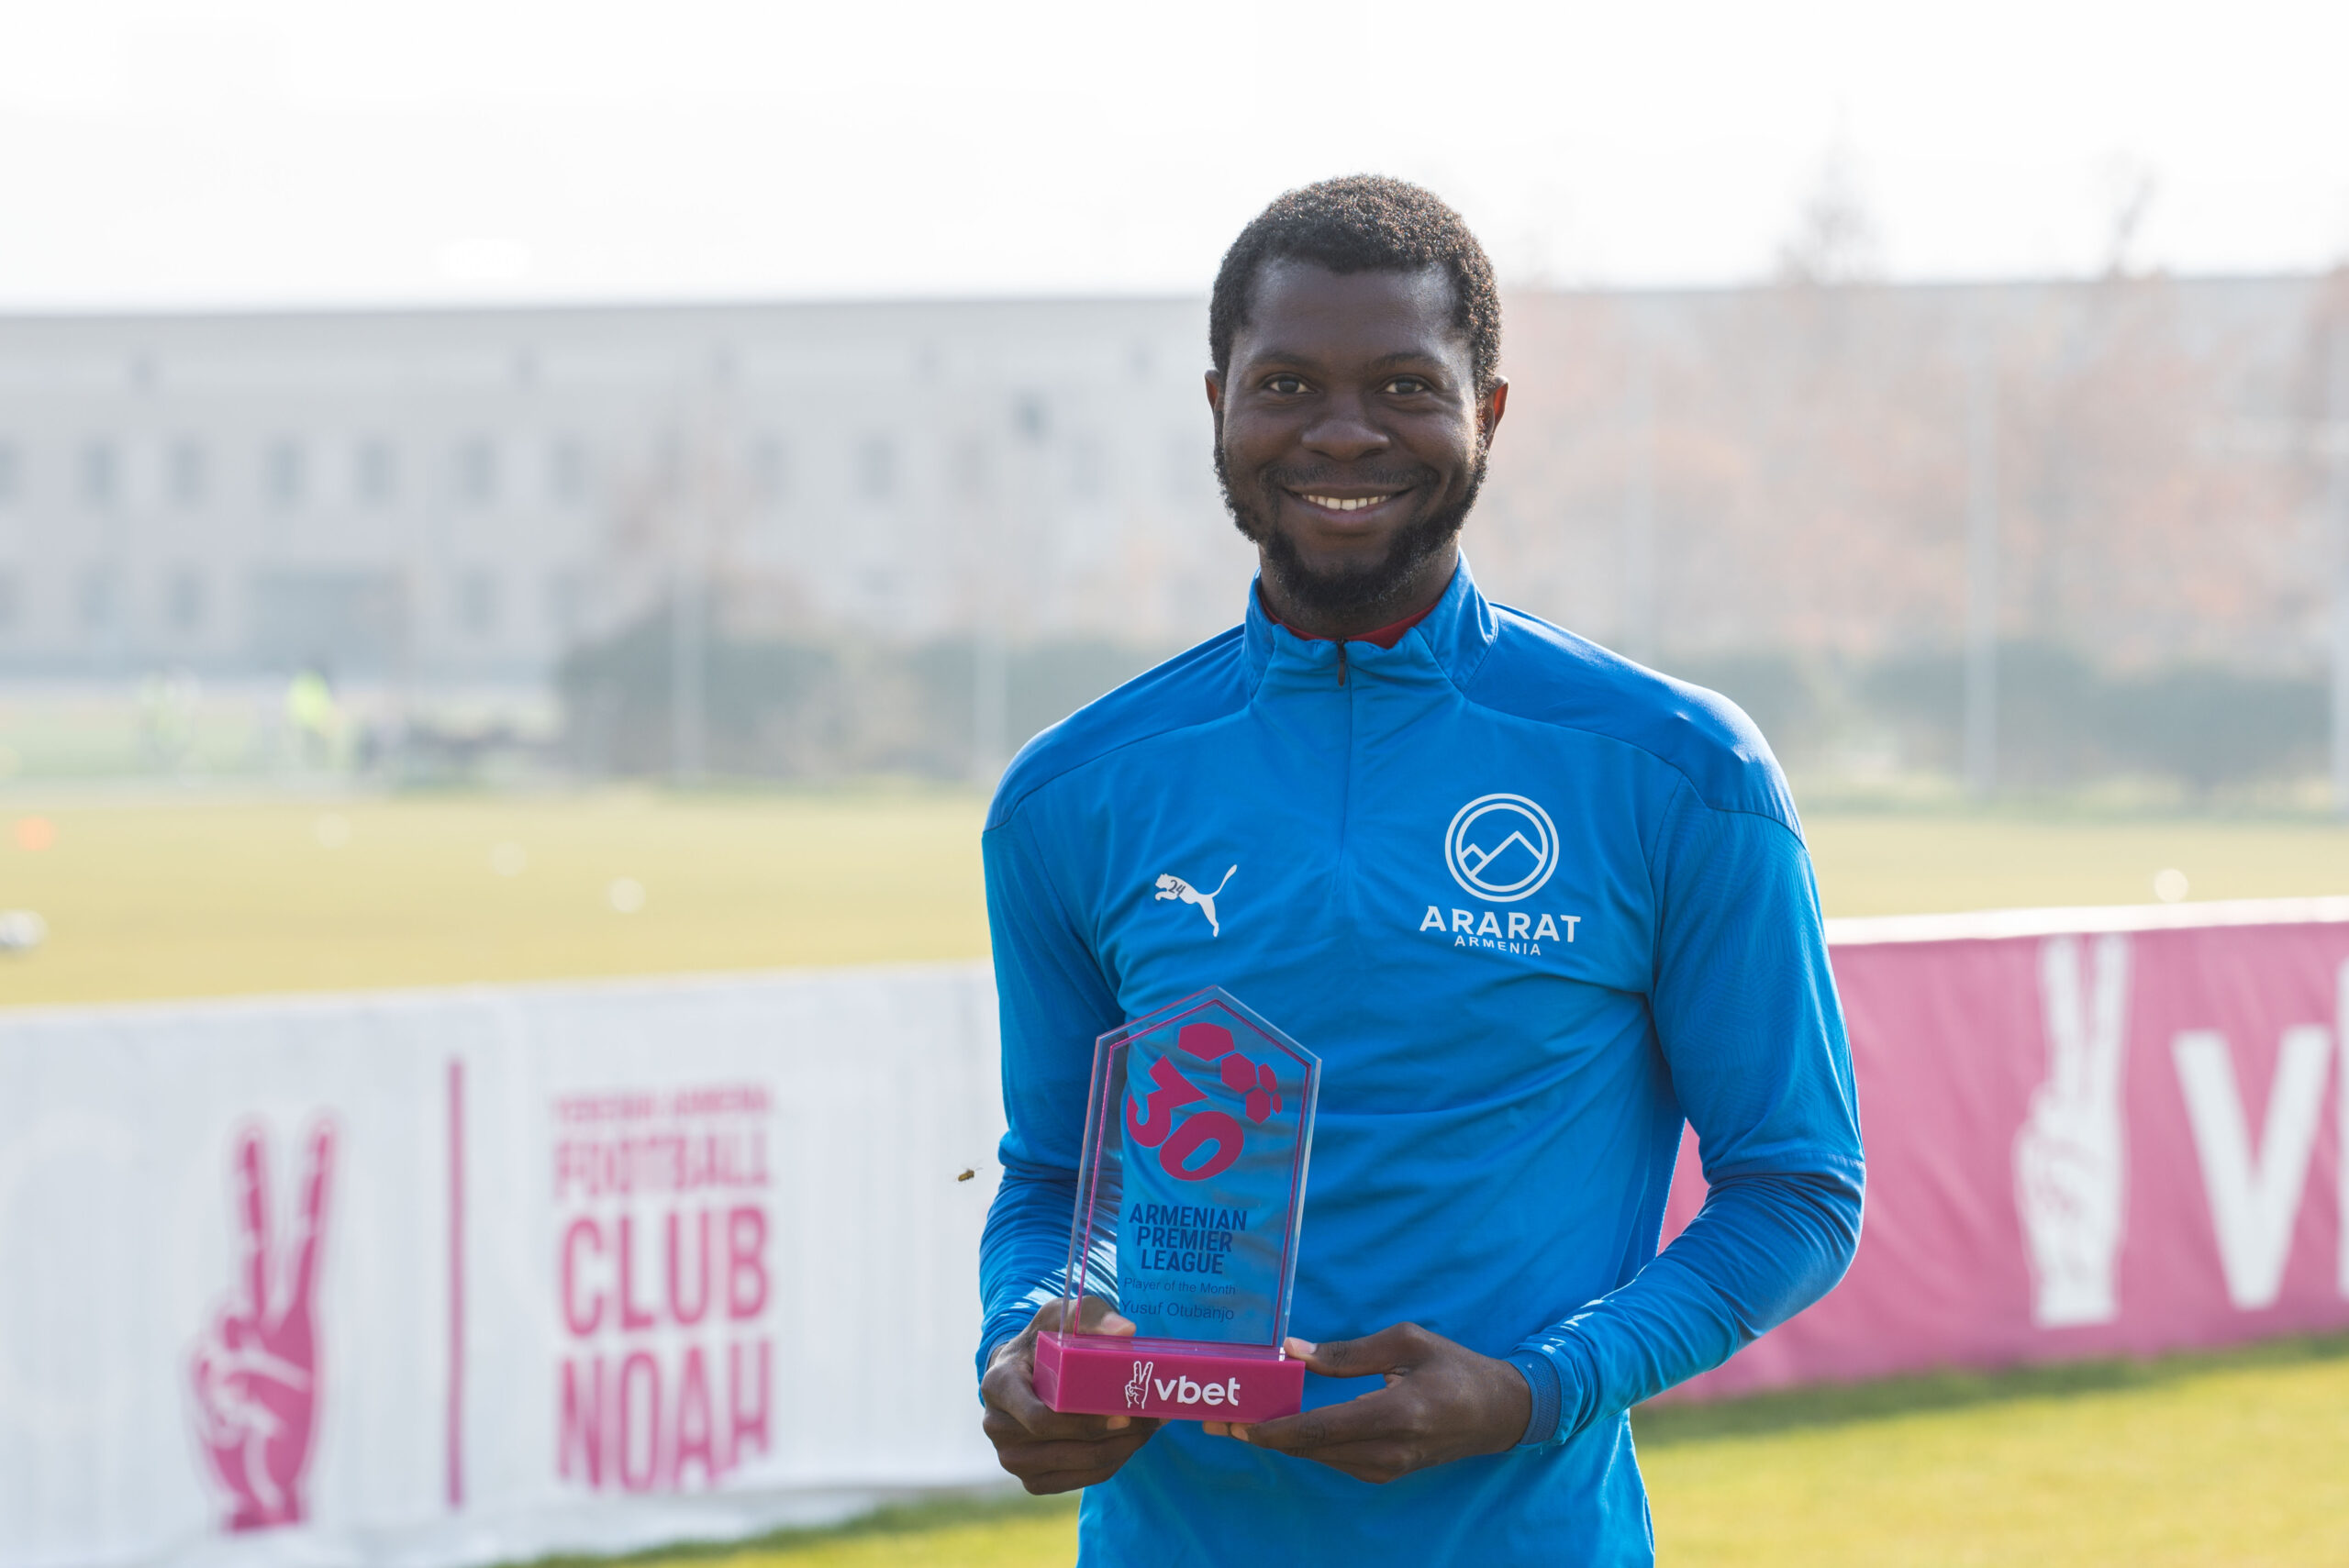 Vbet APL Player of The Month